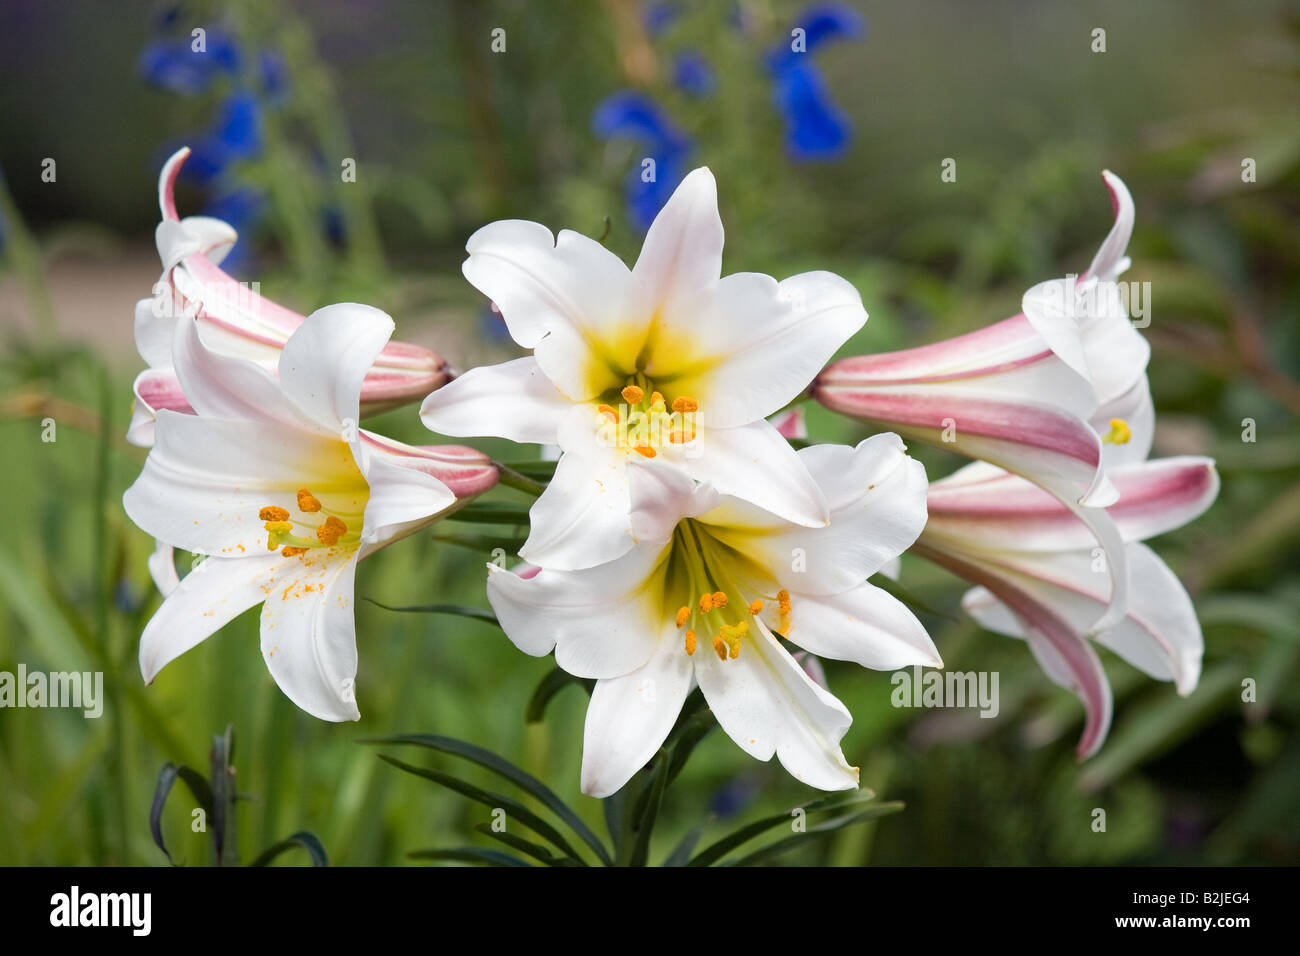 Bunch of lilies on a summers days Stock Photo